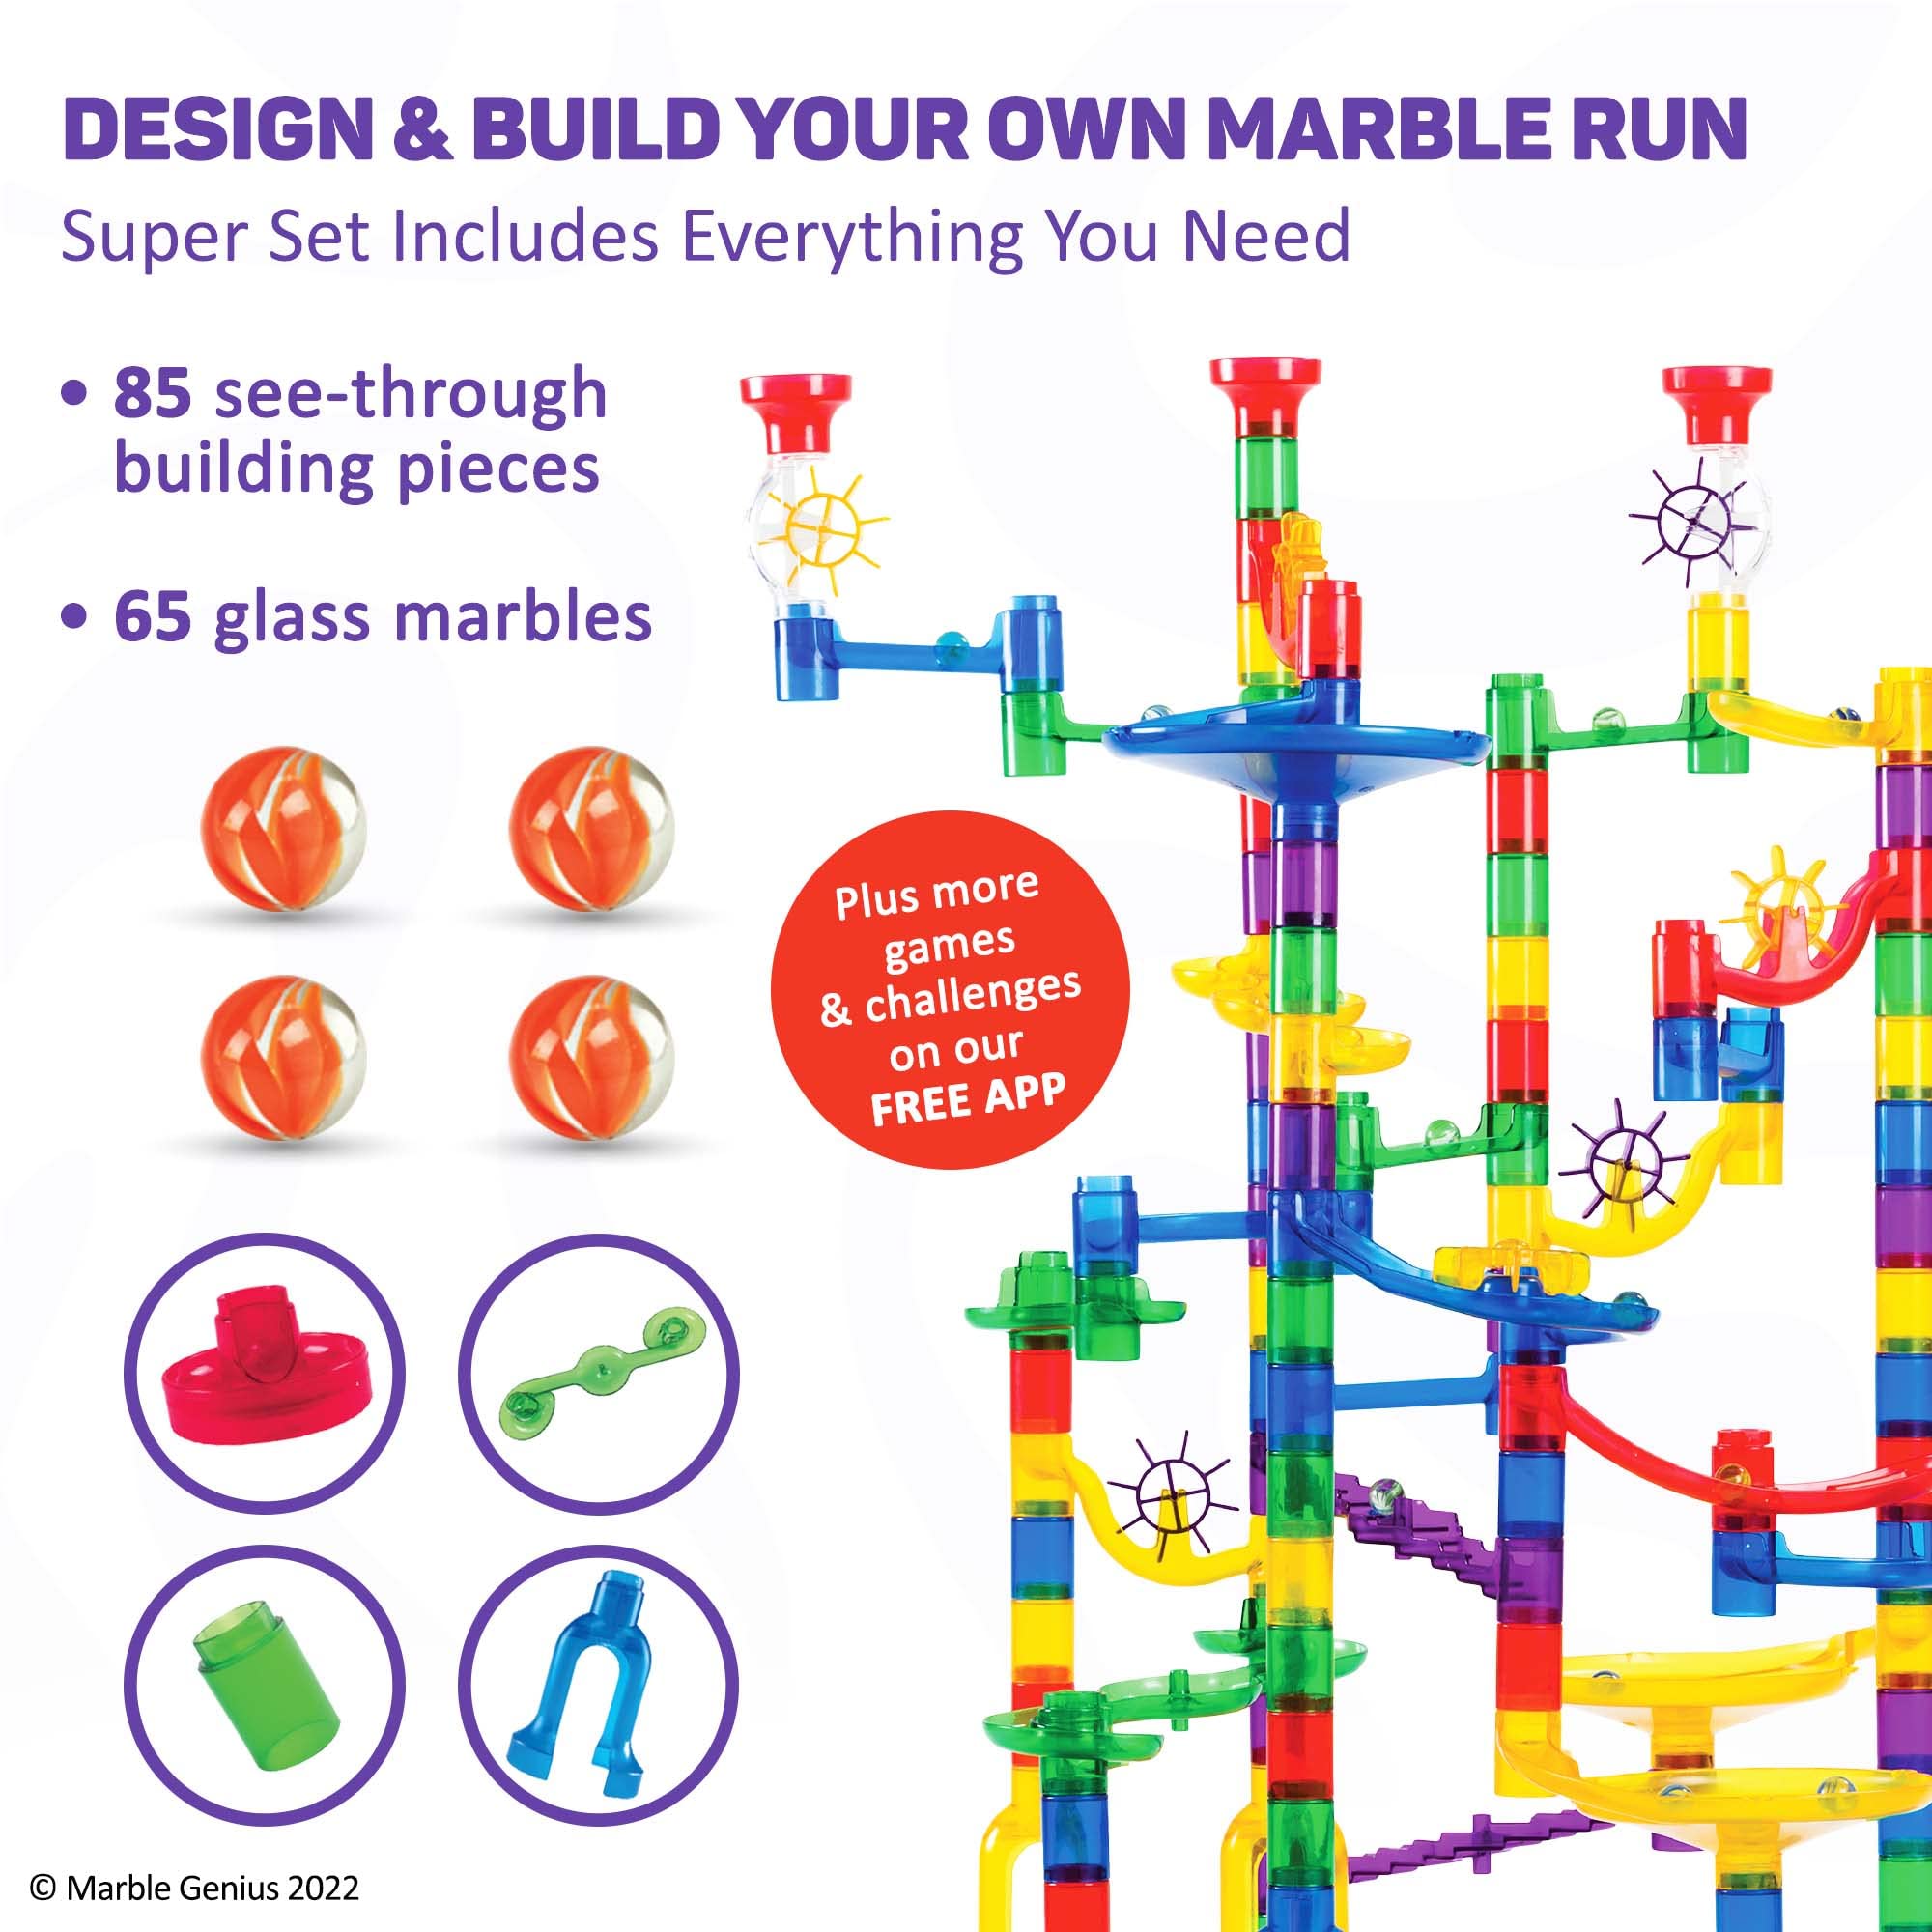 Marble Genius Marble Run (150 Complete Pieces) Maze Track or Race Game for Adults, Teens, Toddlers, or Kids Aged 4-8 Years Old, (85 Translucent Marbulous Pieces + 65 Glass-Marble Set), Super Set